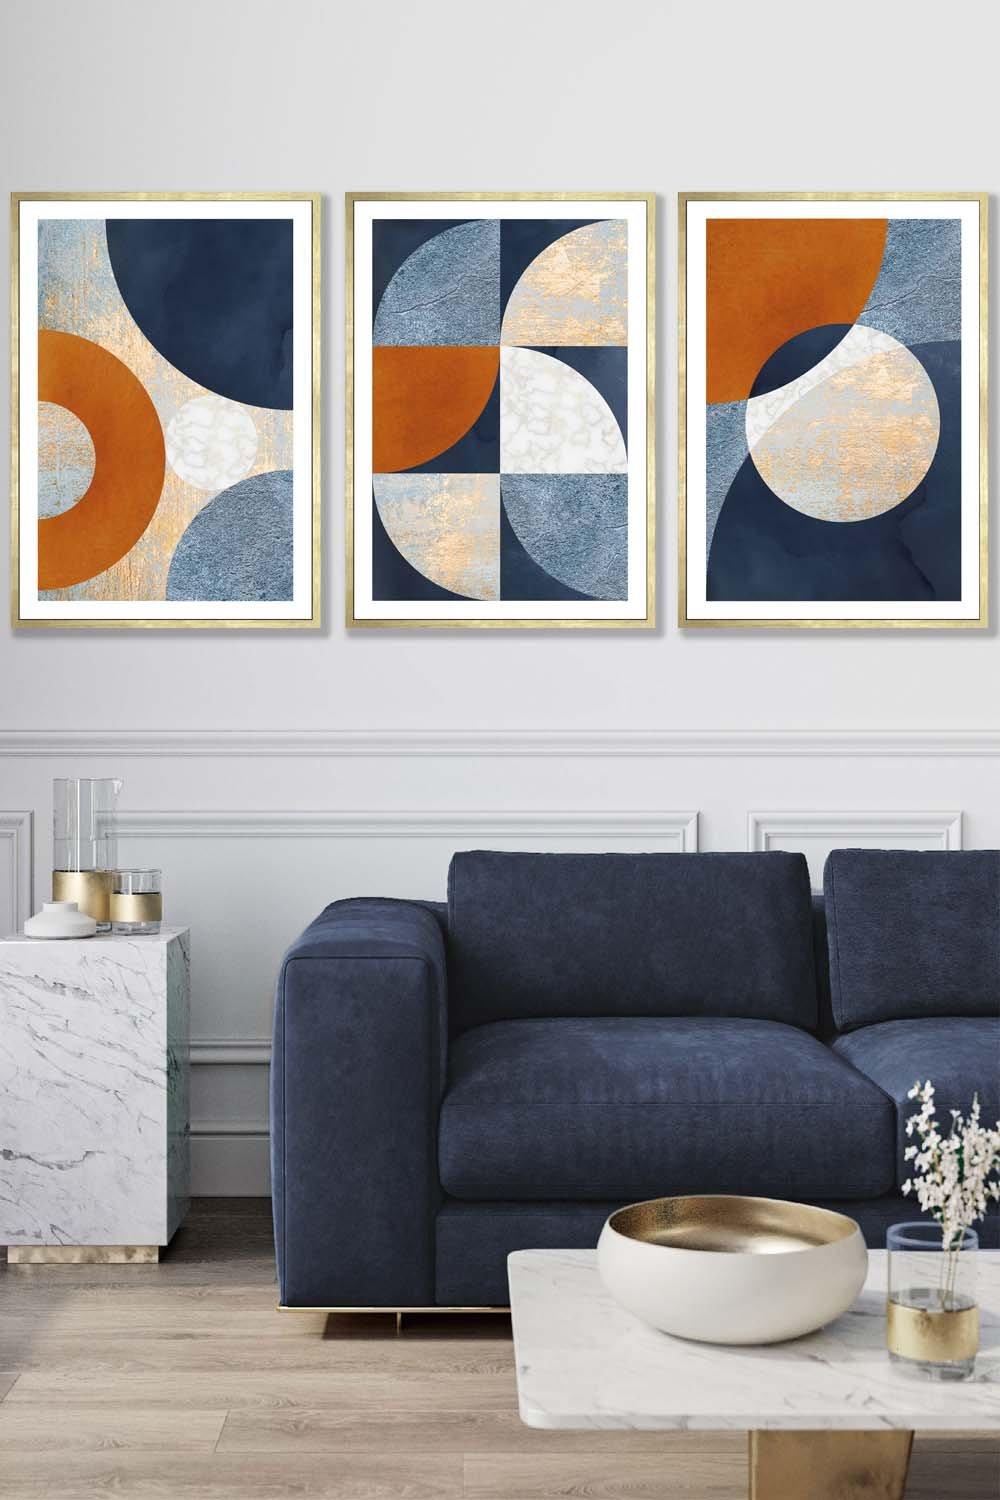 Geometric Abstract Textured Circles in Navy Blue Orange Gold Framed Wall Art - Large